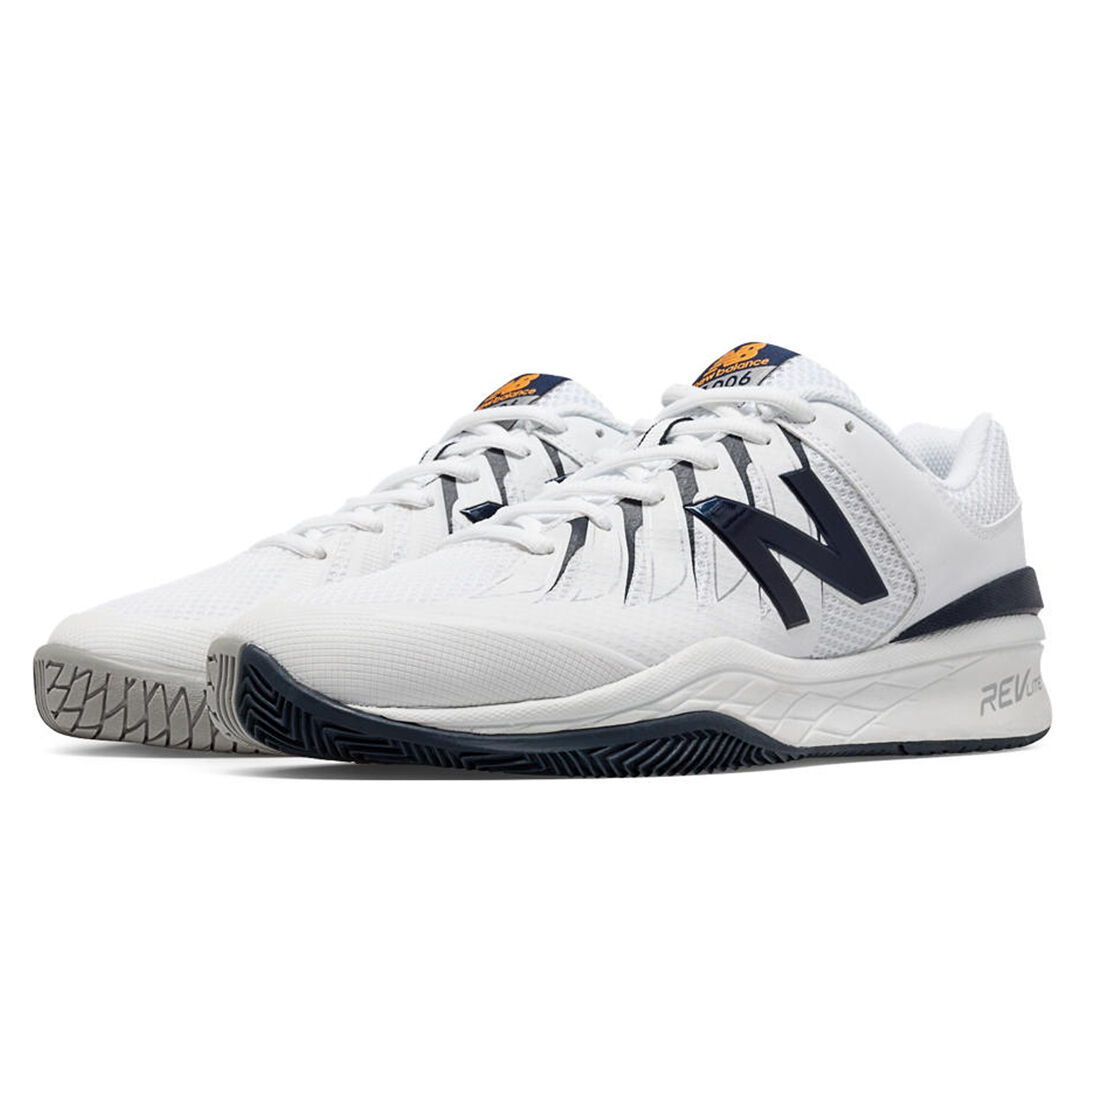 mens new balance tennis shoes on sale